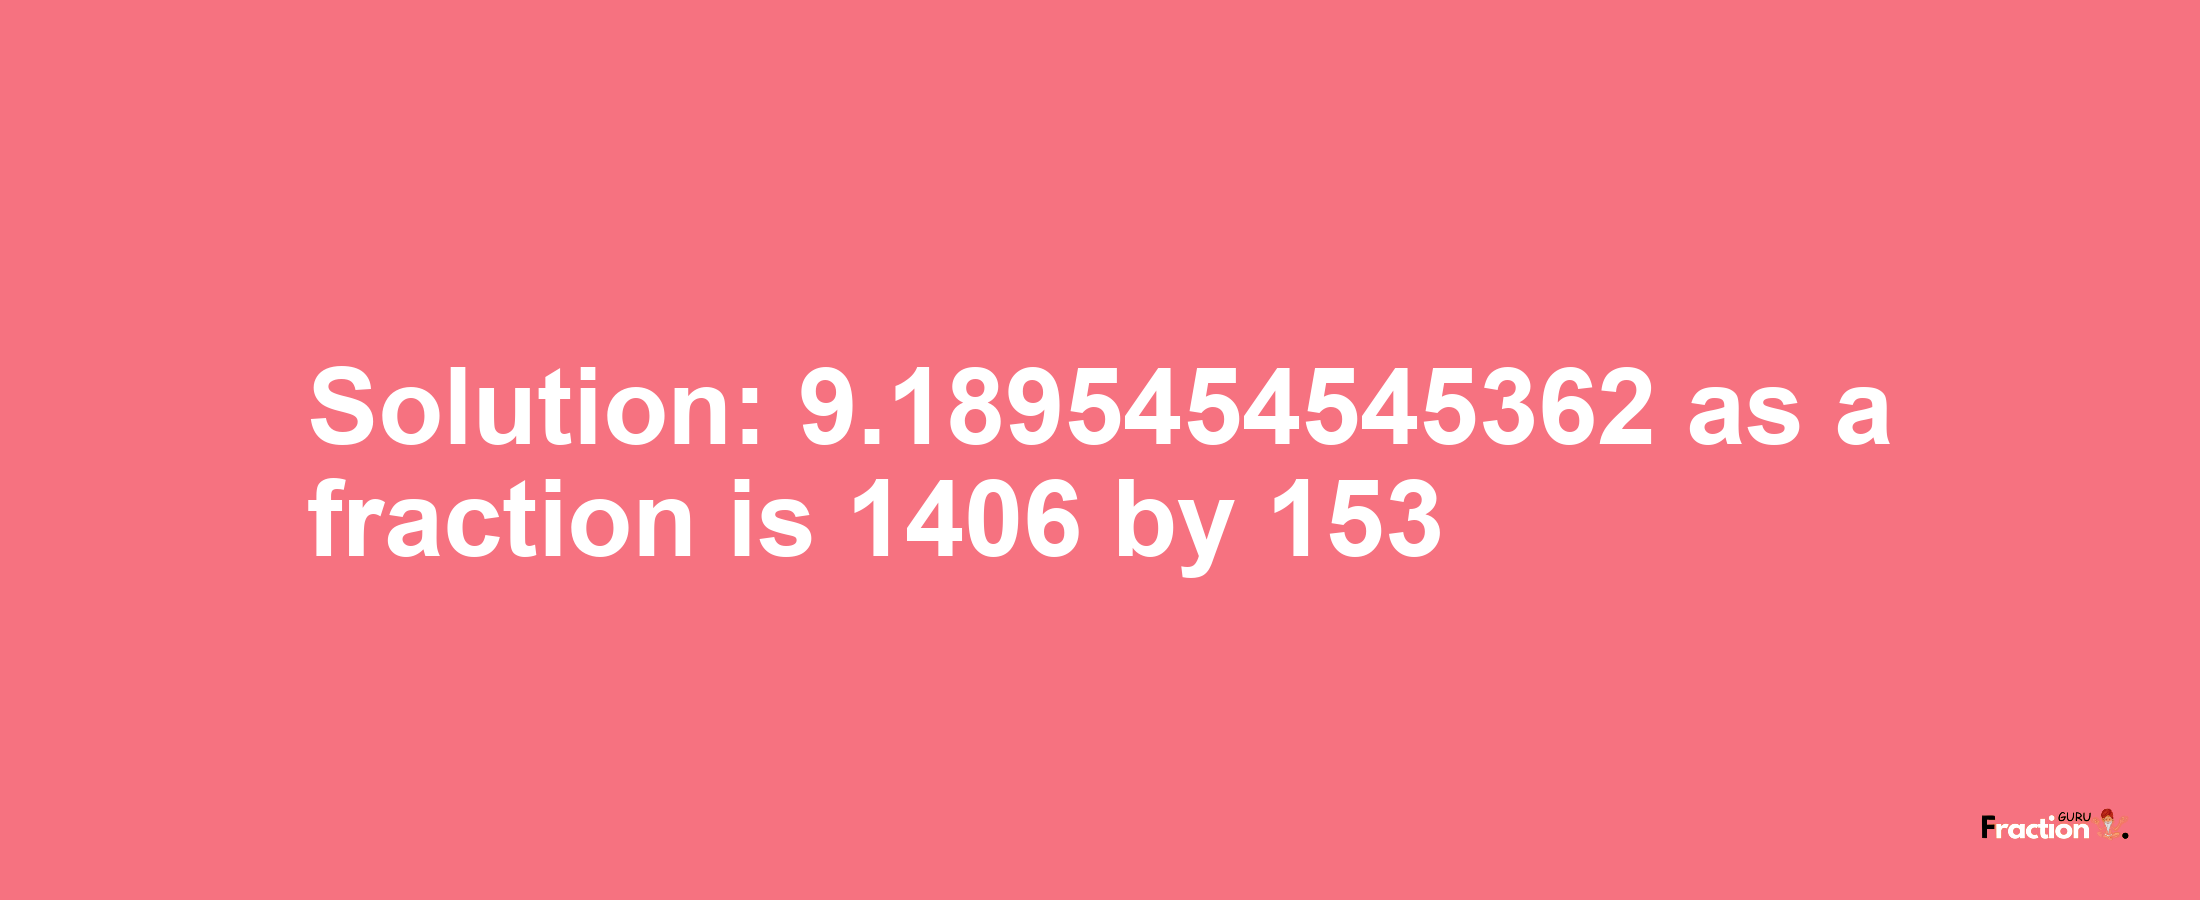 Solution:9.1895454545362 as a fraction is 1406/153